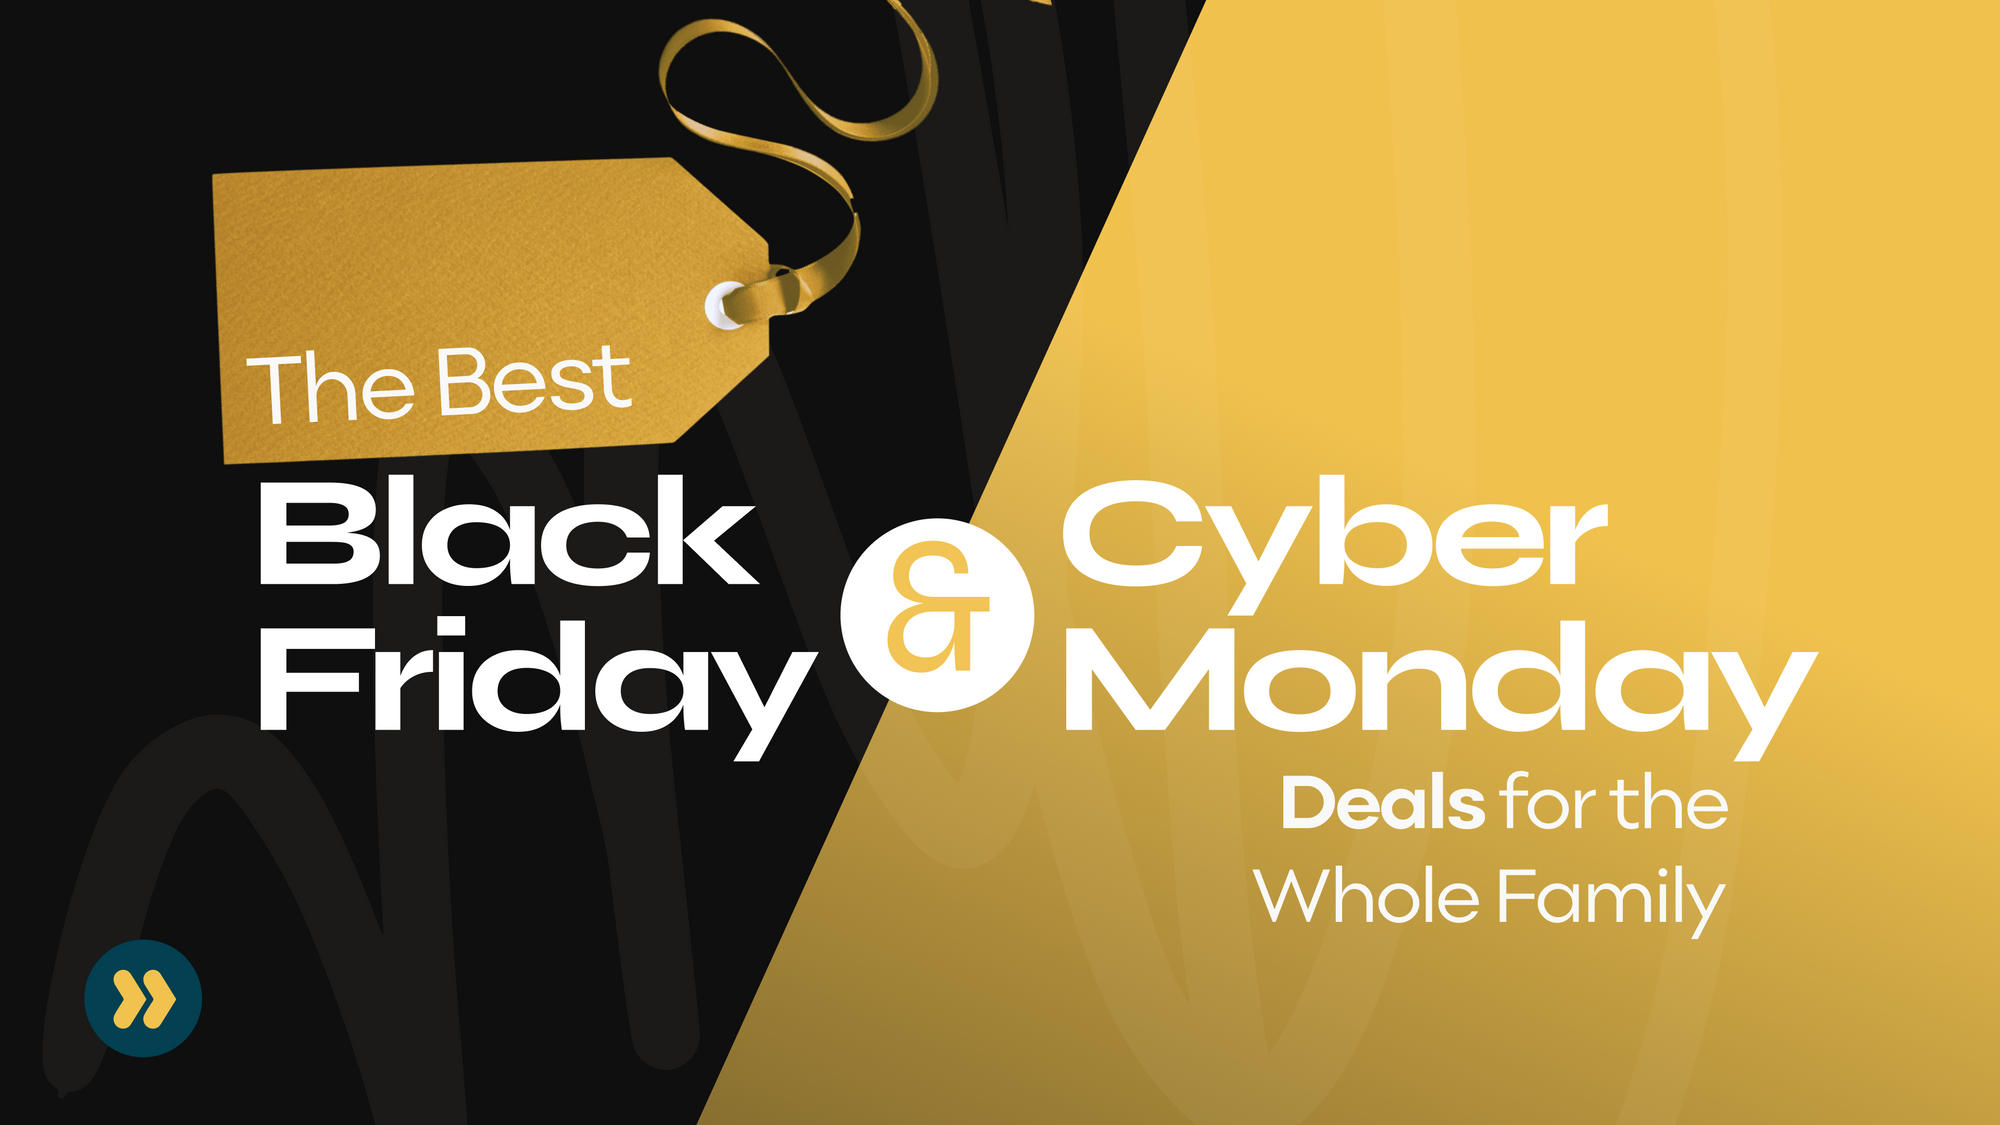 The Best Black Friday and Cyber Monday Deals for the Whole Family